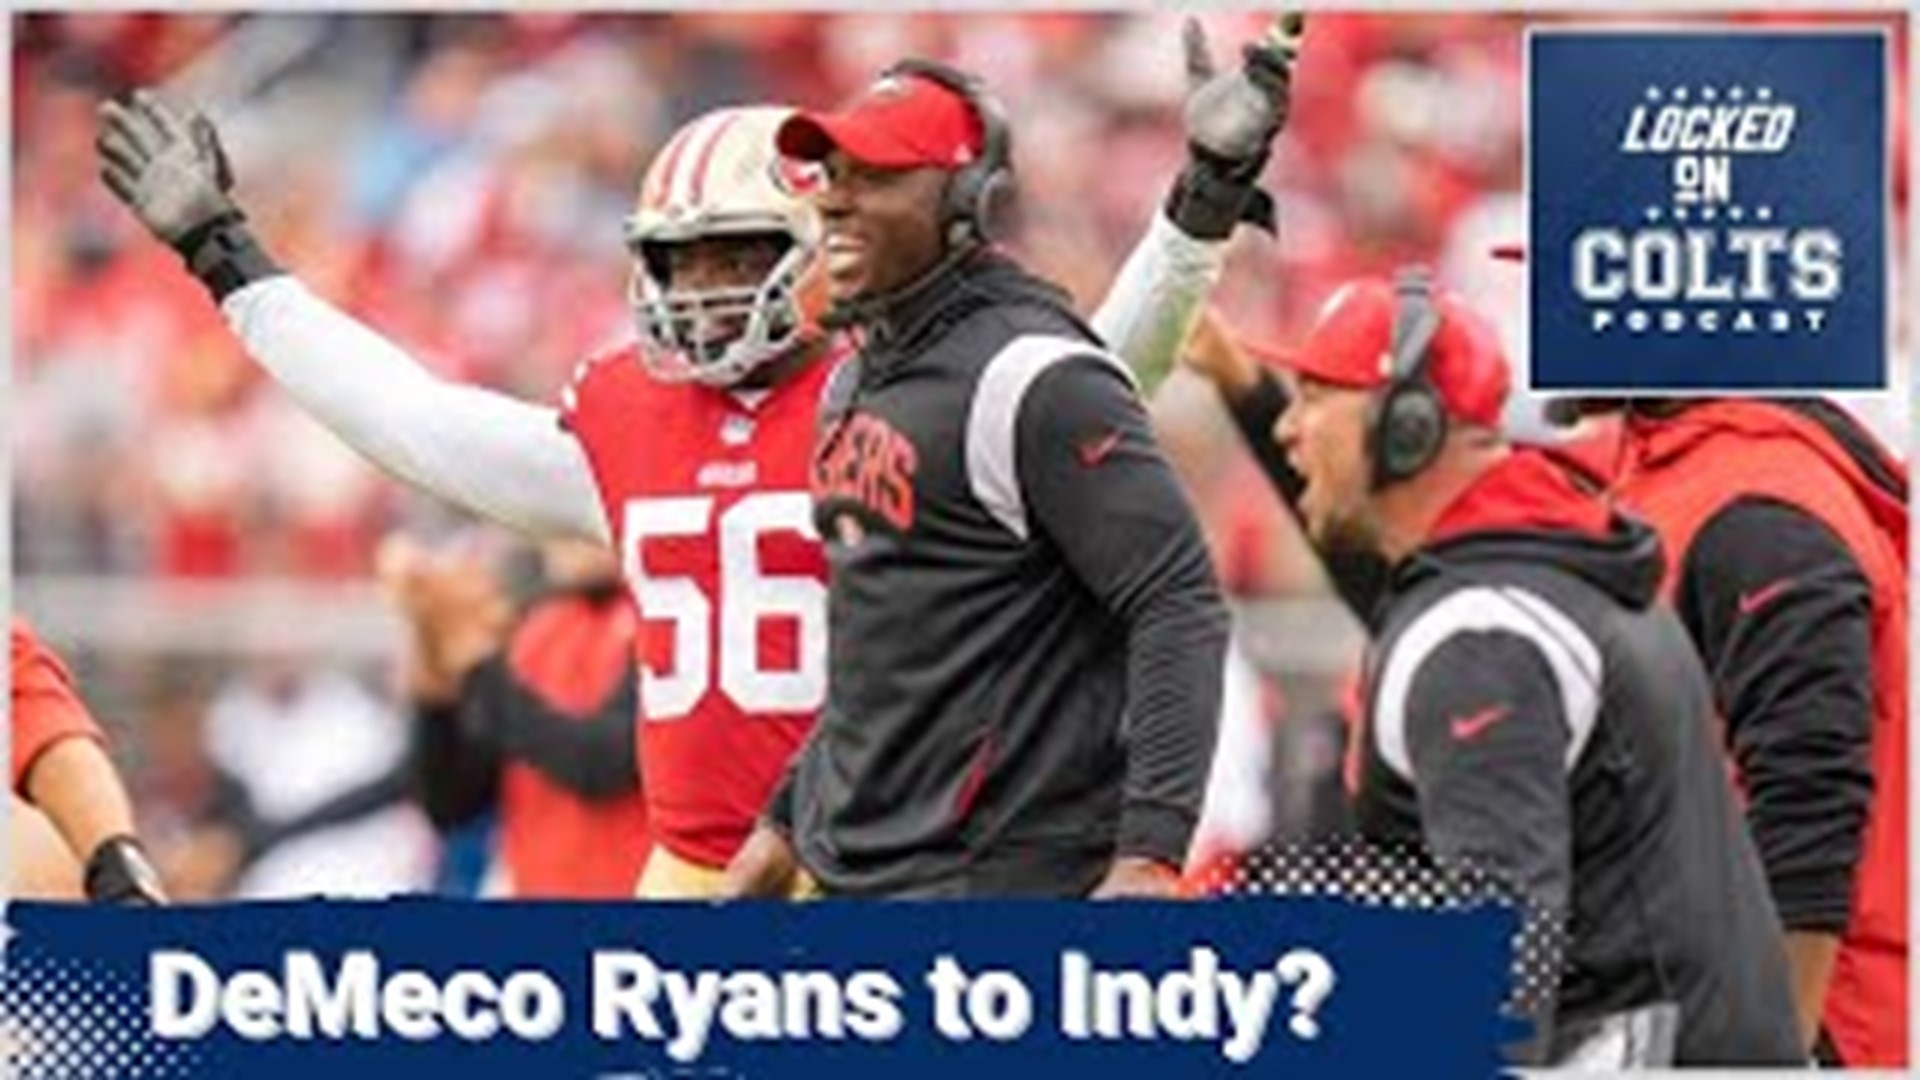 Which candidates make the most sense for the team: Ben Johnson, Jim Harbaugh, DeMeco Ryans?